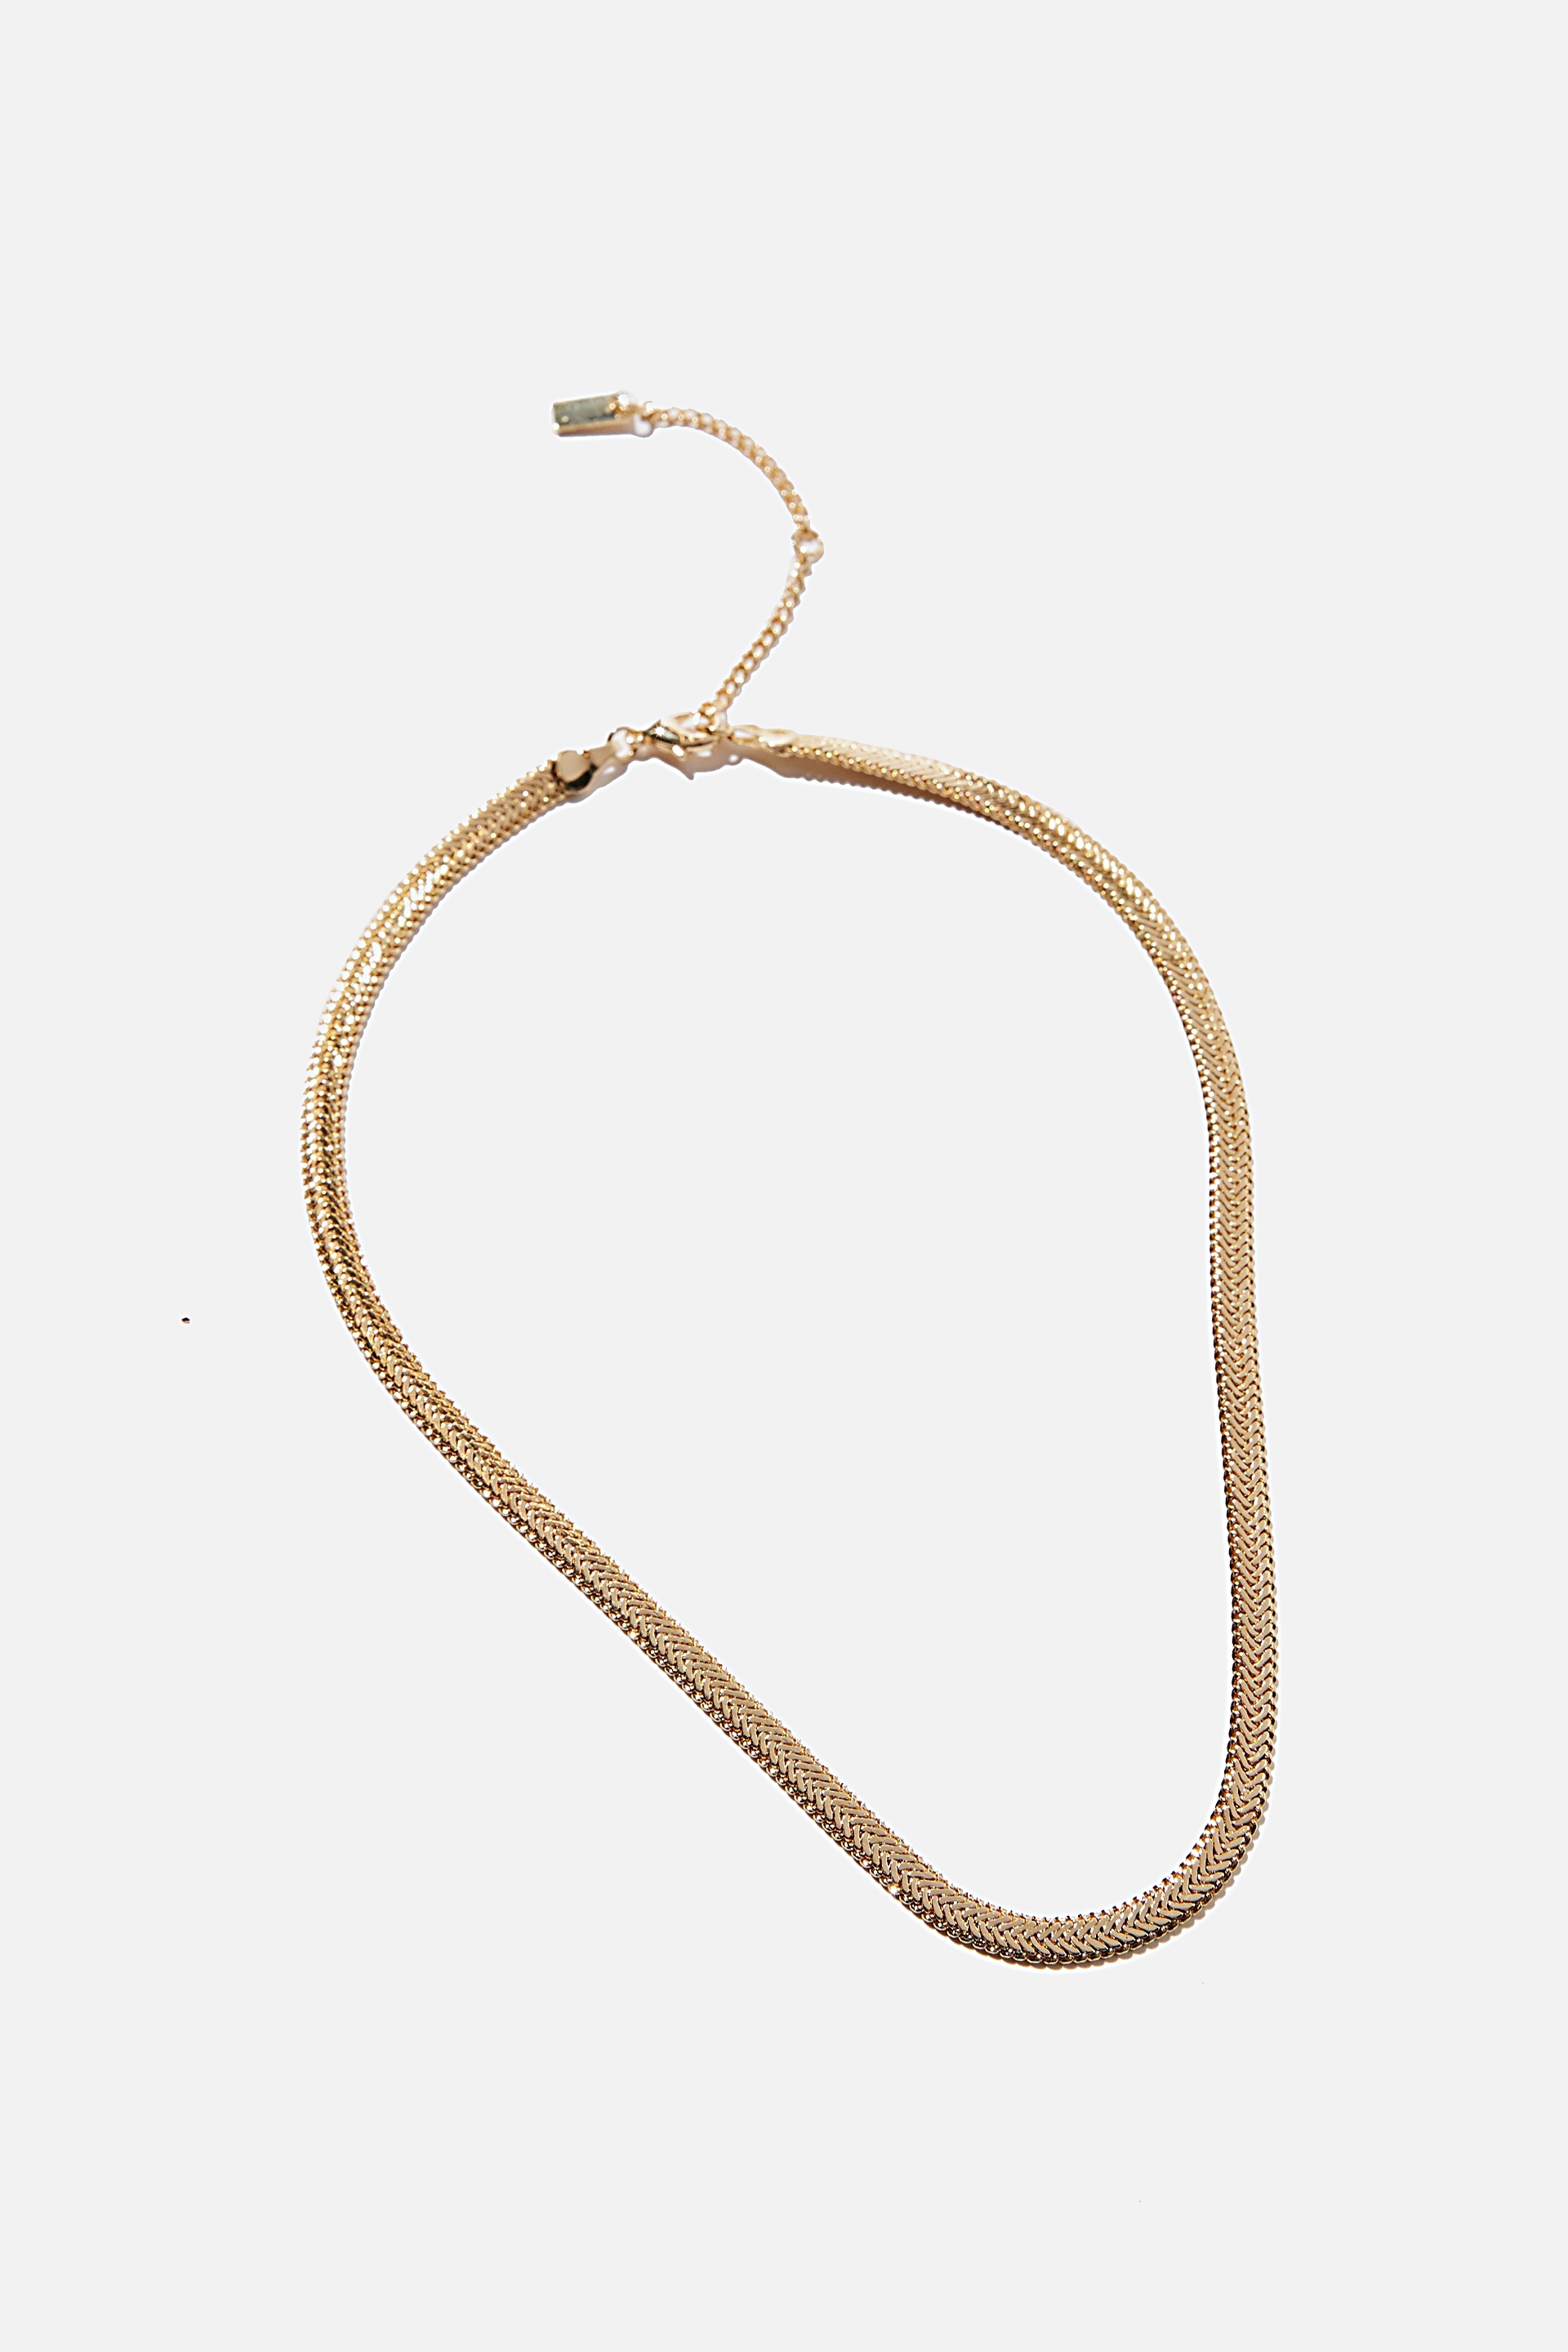 Rubi - Premium Forever Necklace - Gold plated flat snake